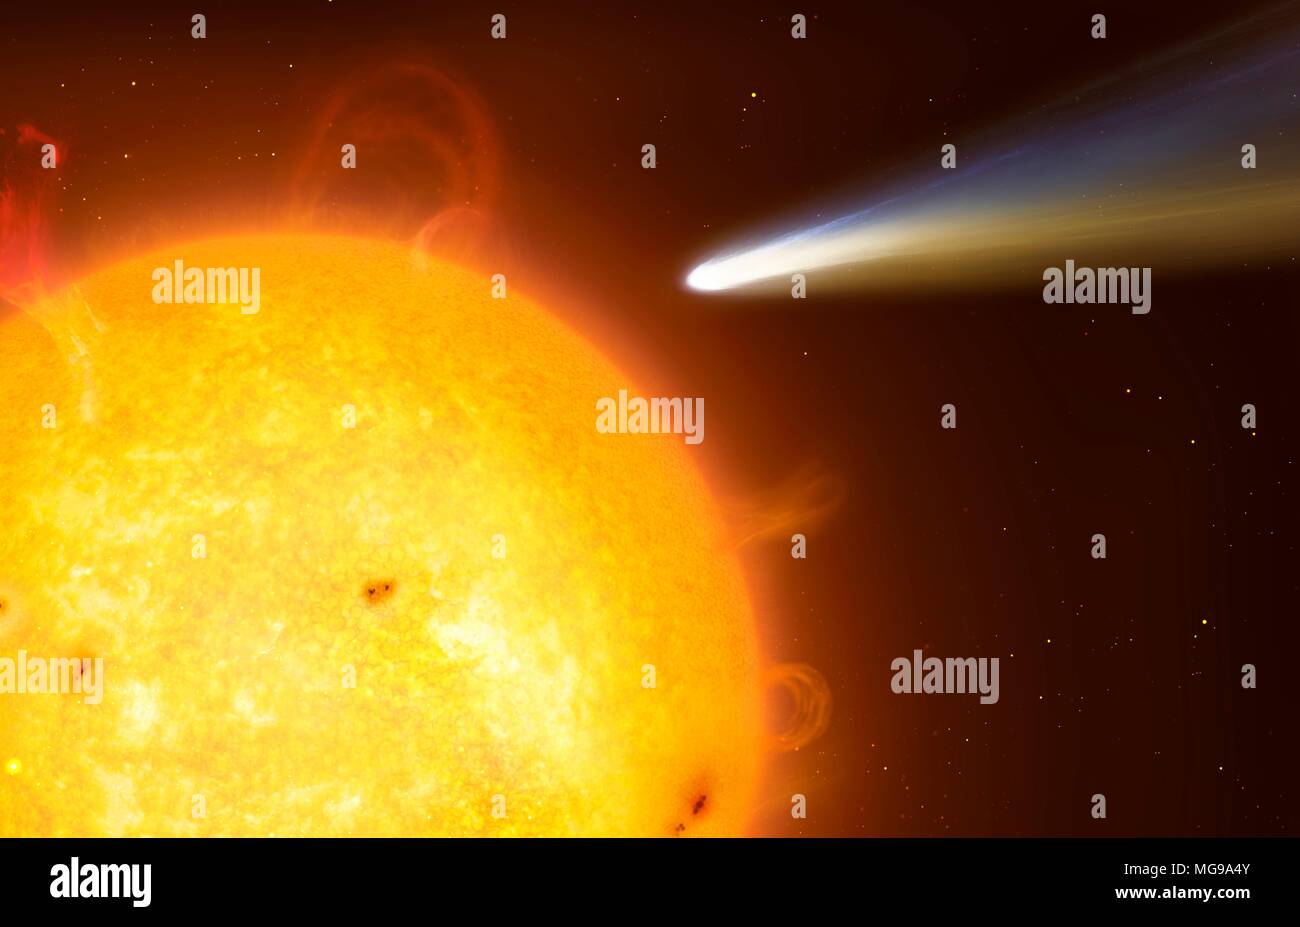 Illustration of a sungrazing comet. These are comets that pass very close to the Sun at perihelion. Sometimes they can skirt above the photosphere at distances of just a few thousand kilometres - the mere diameter of a small planet. Occasionally comets are completely evaporated in this process, but some can last several passes before either falling into the Sun or disintegrating because of tidal forces. Stock Photo